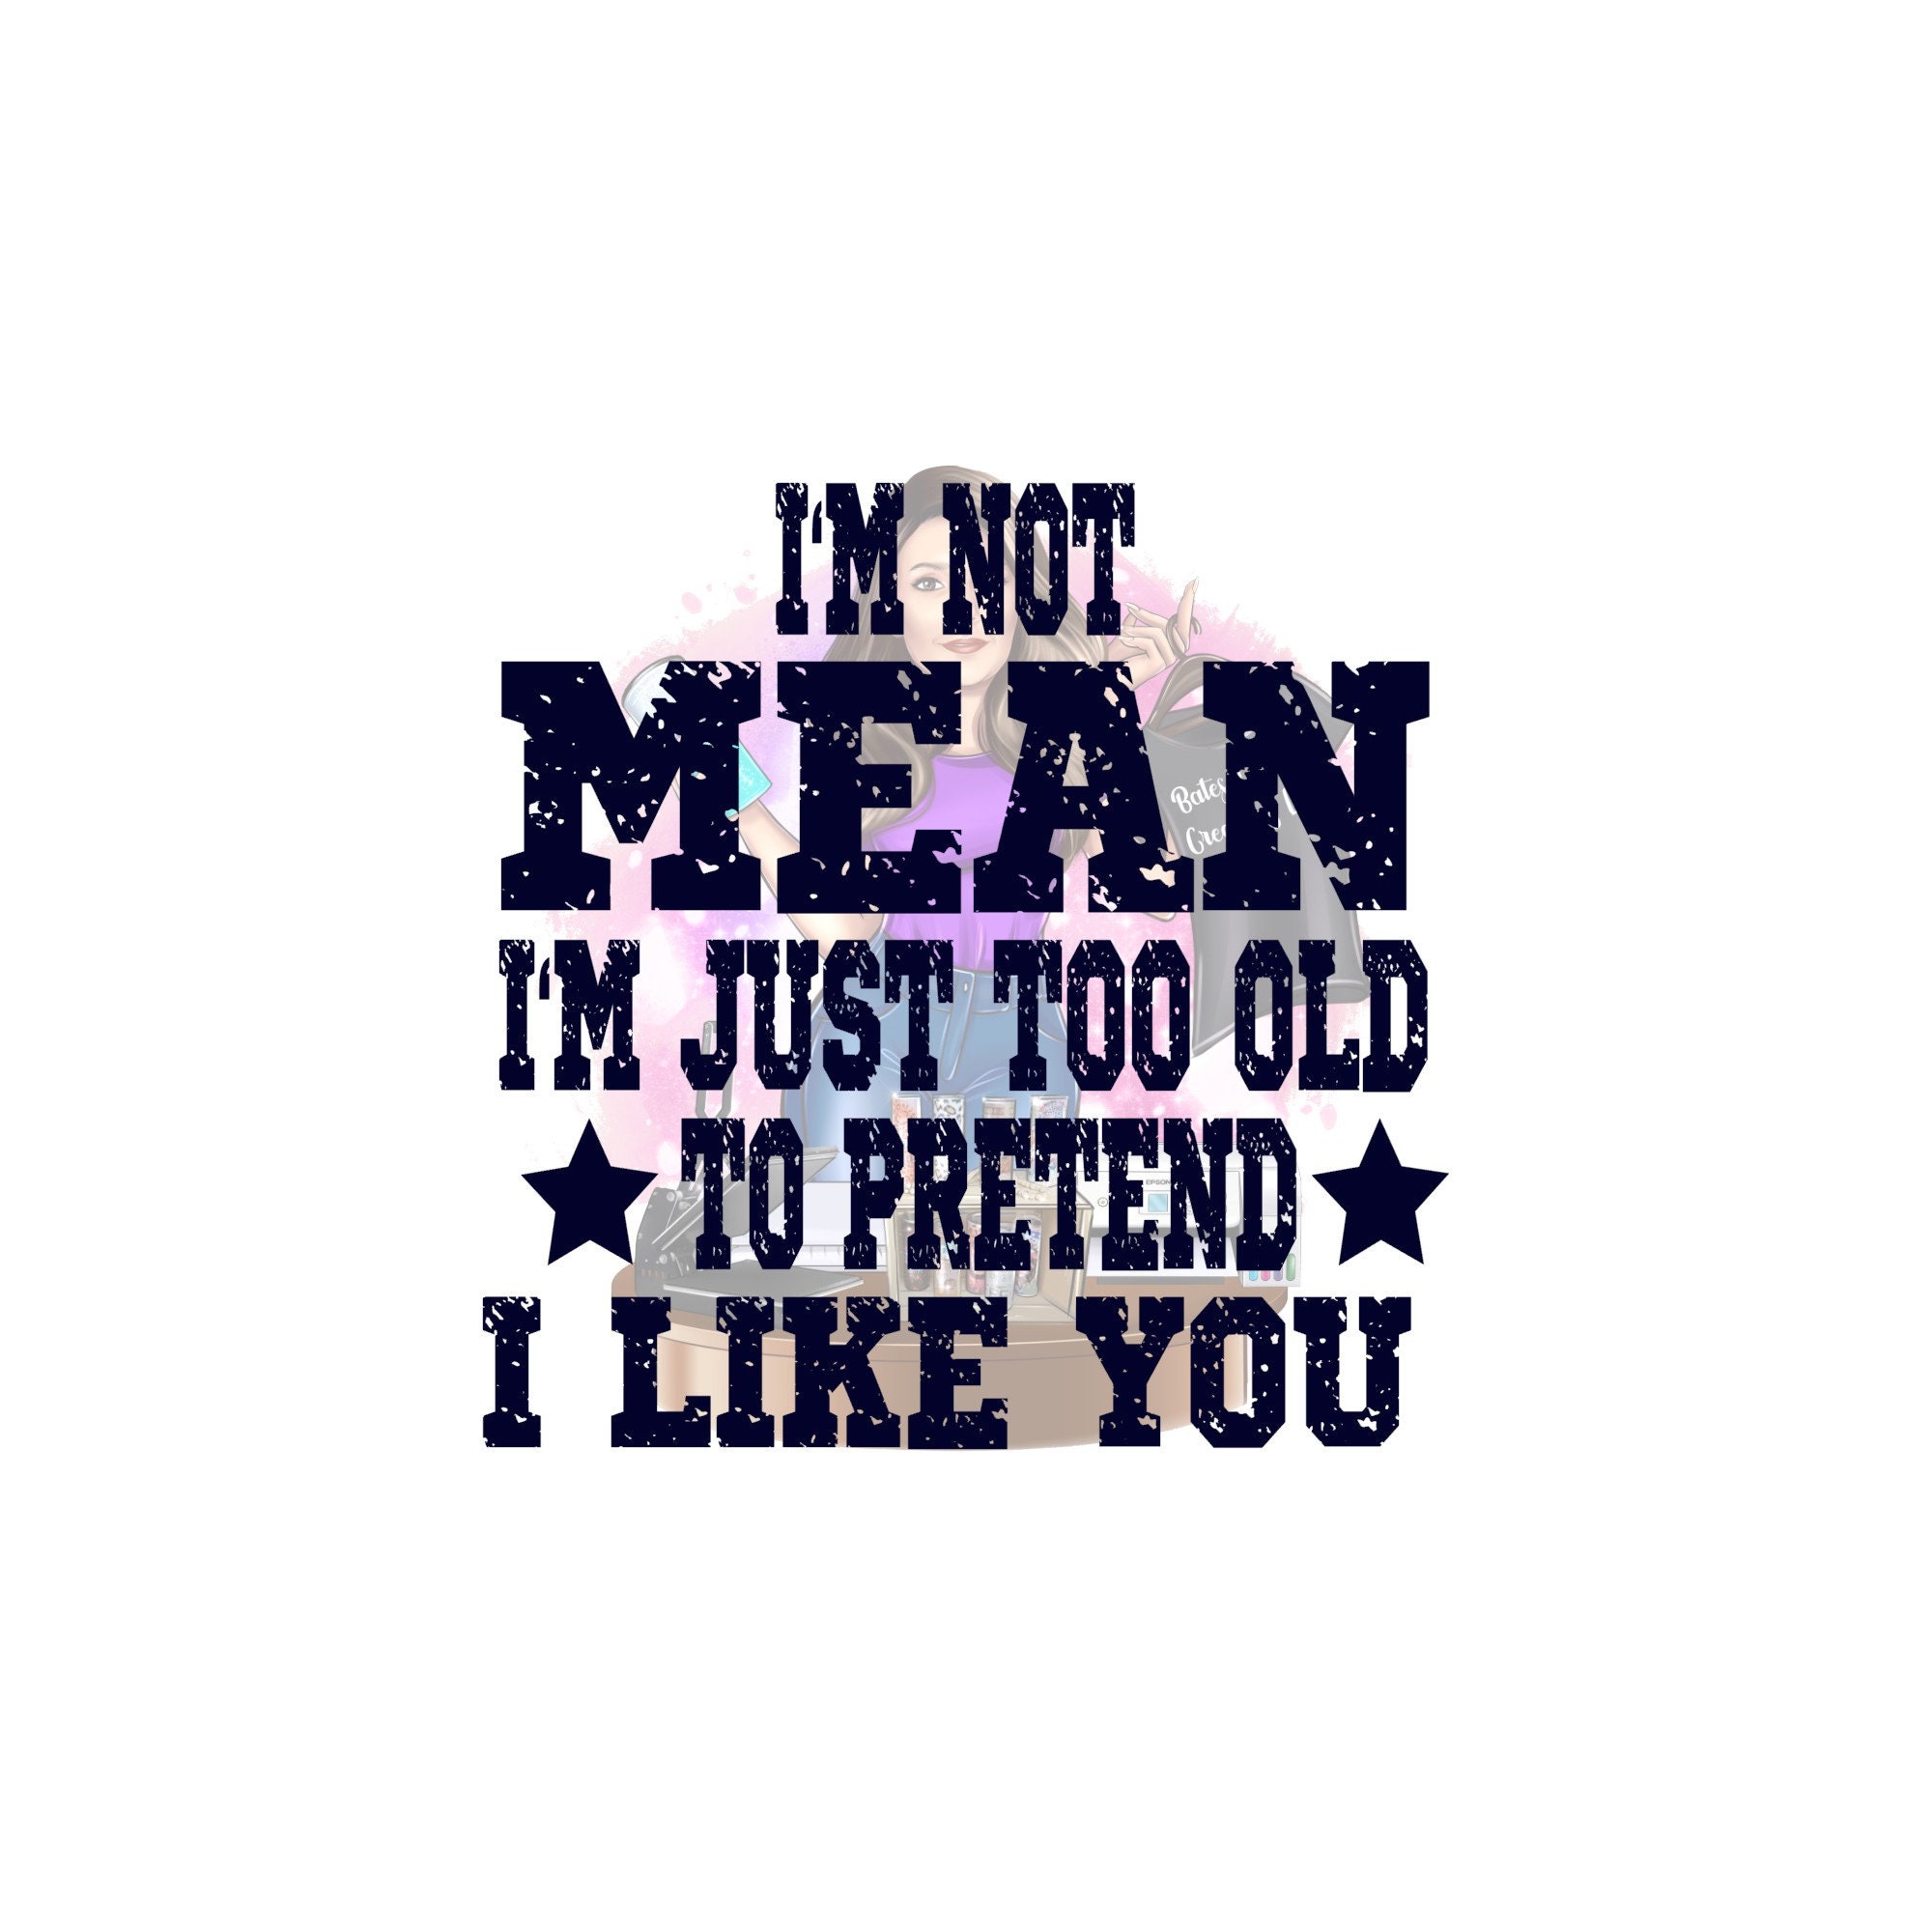 Pretend Meaning 